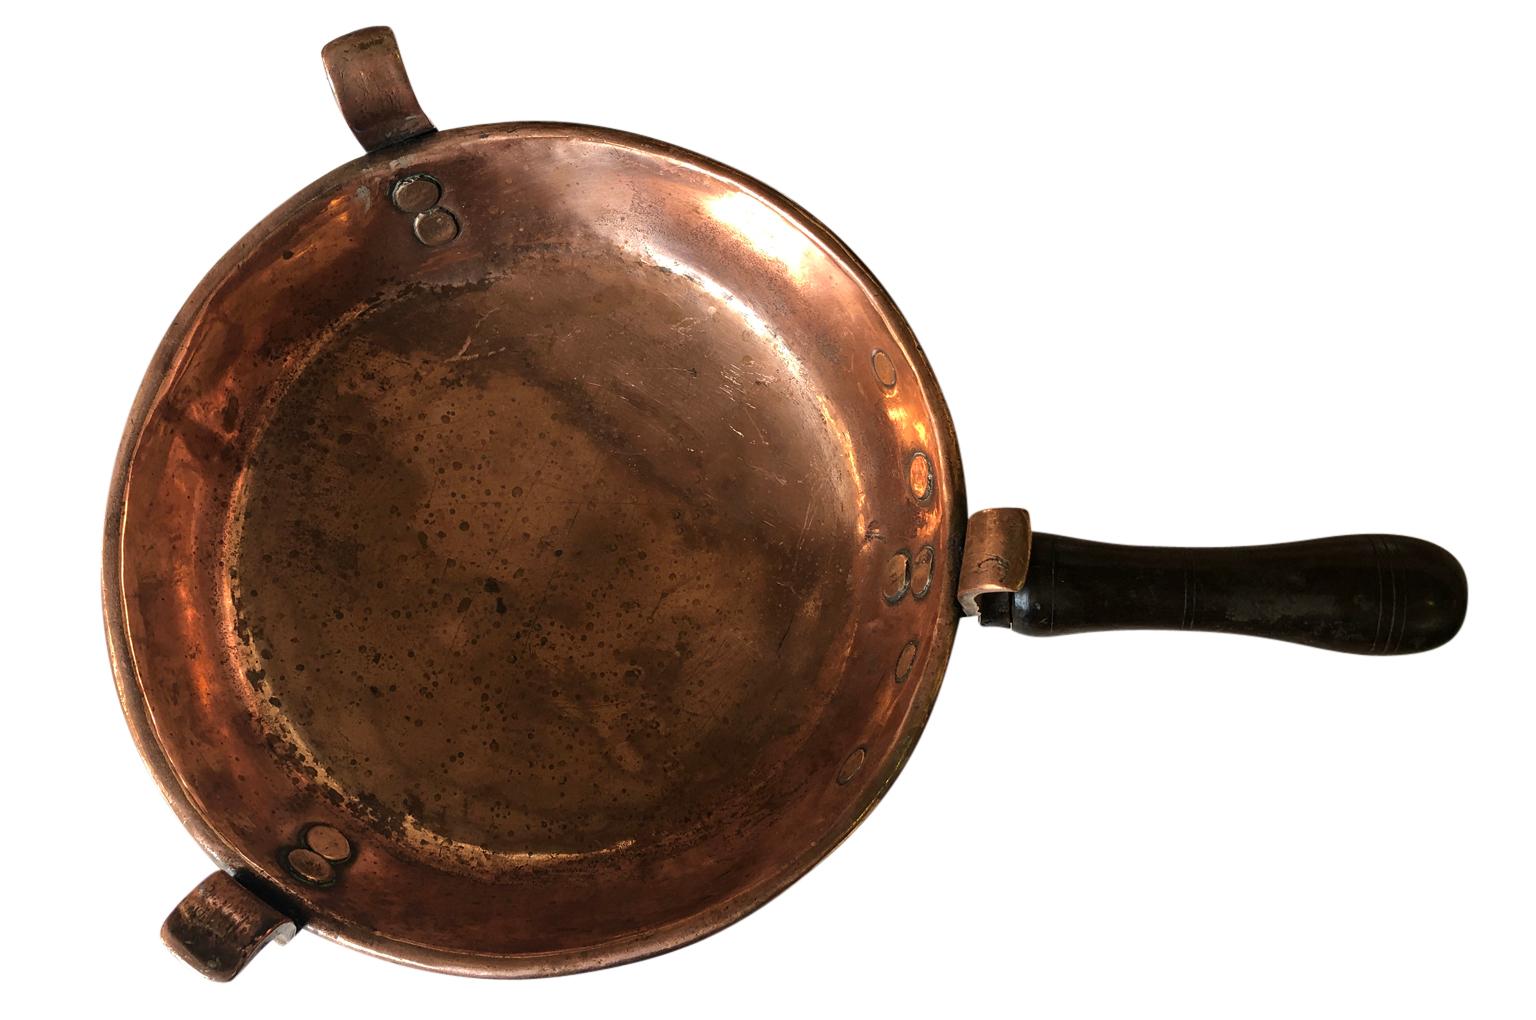 A very charming 18th century footed heavy gauge copper pan with wooden handle. A terrific accent piece for a kitchen island or living area.